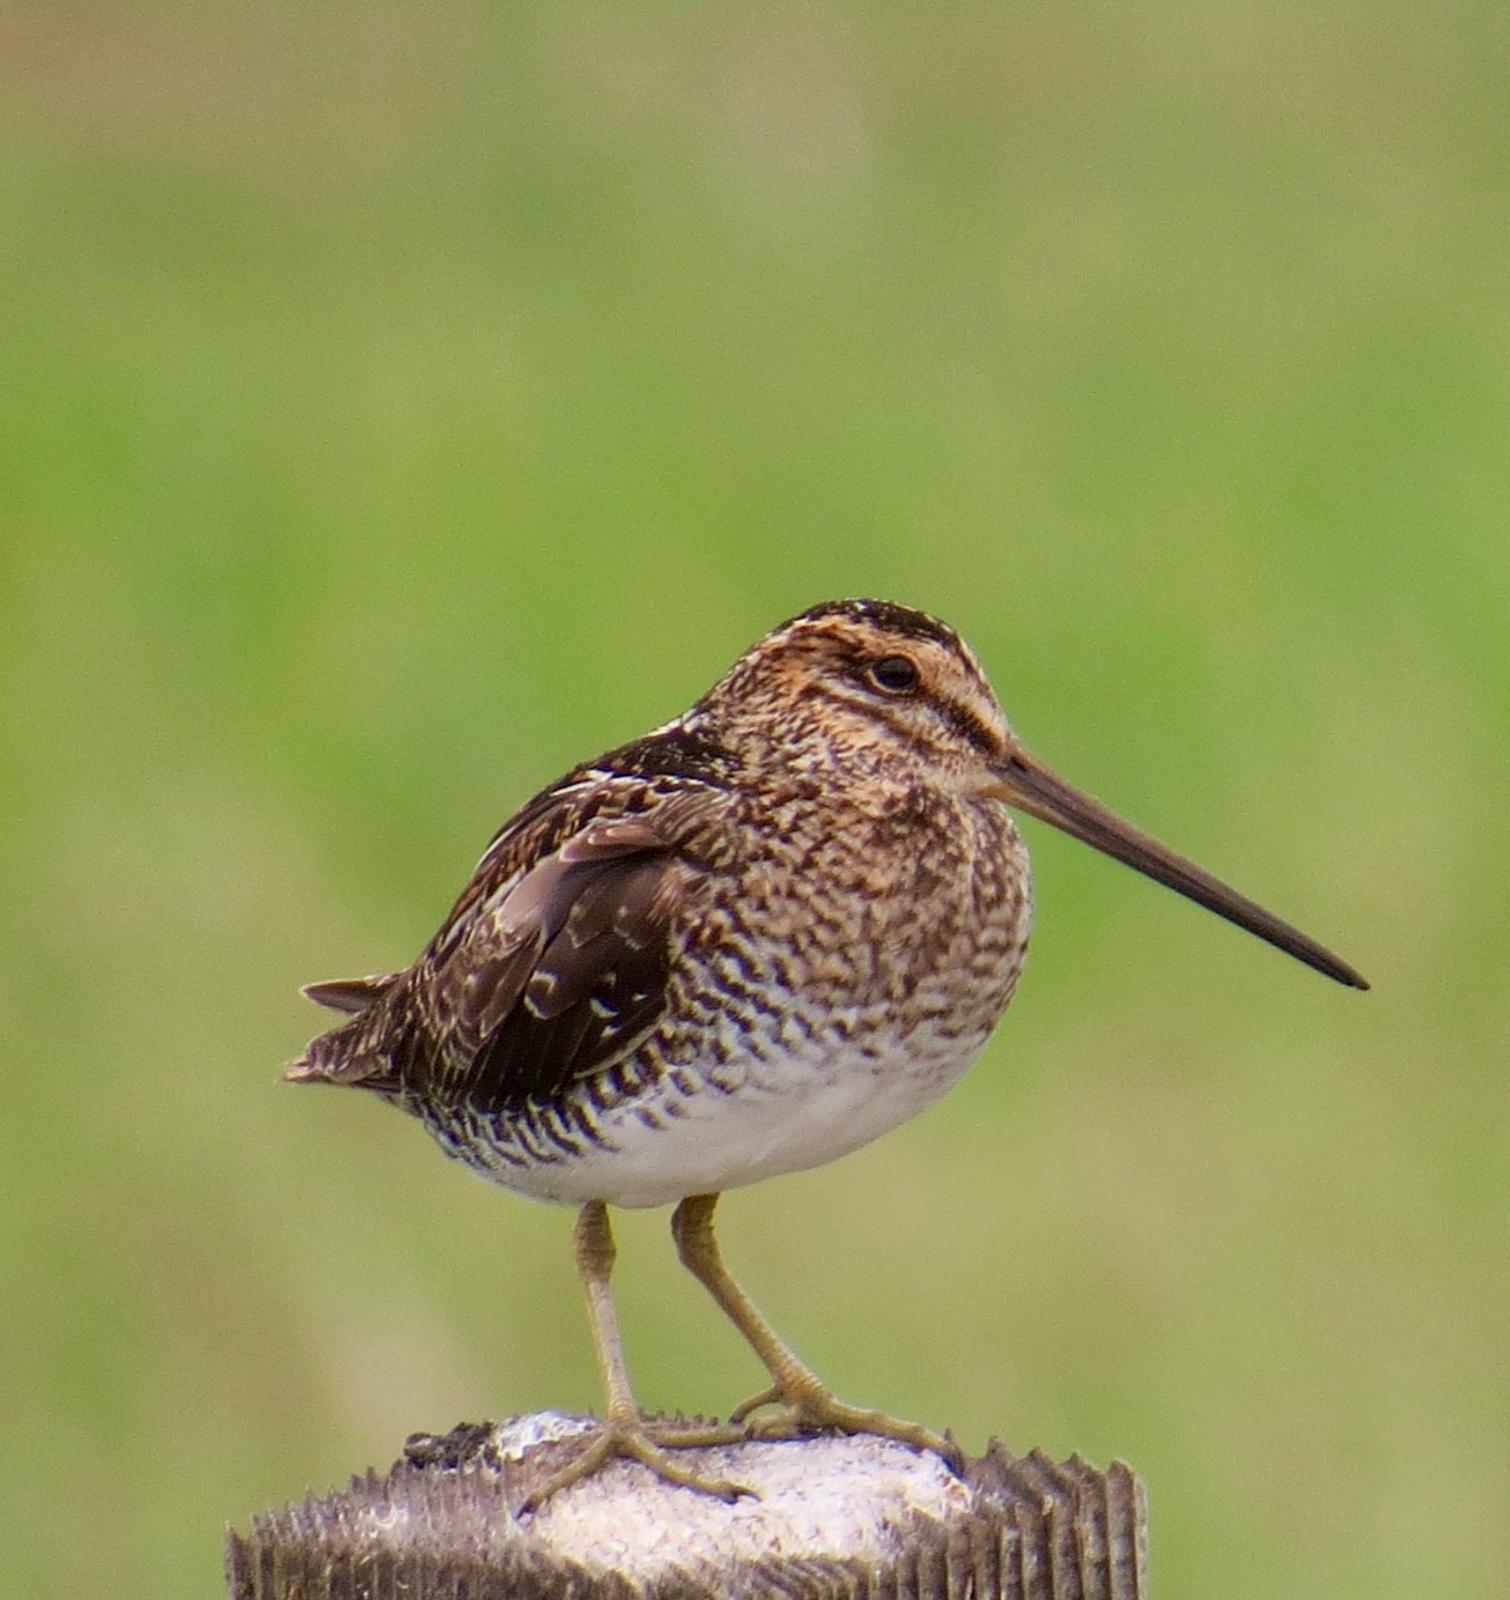 Wilson's Snipe Photo by Don Glasco